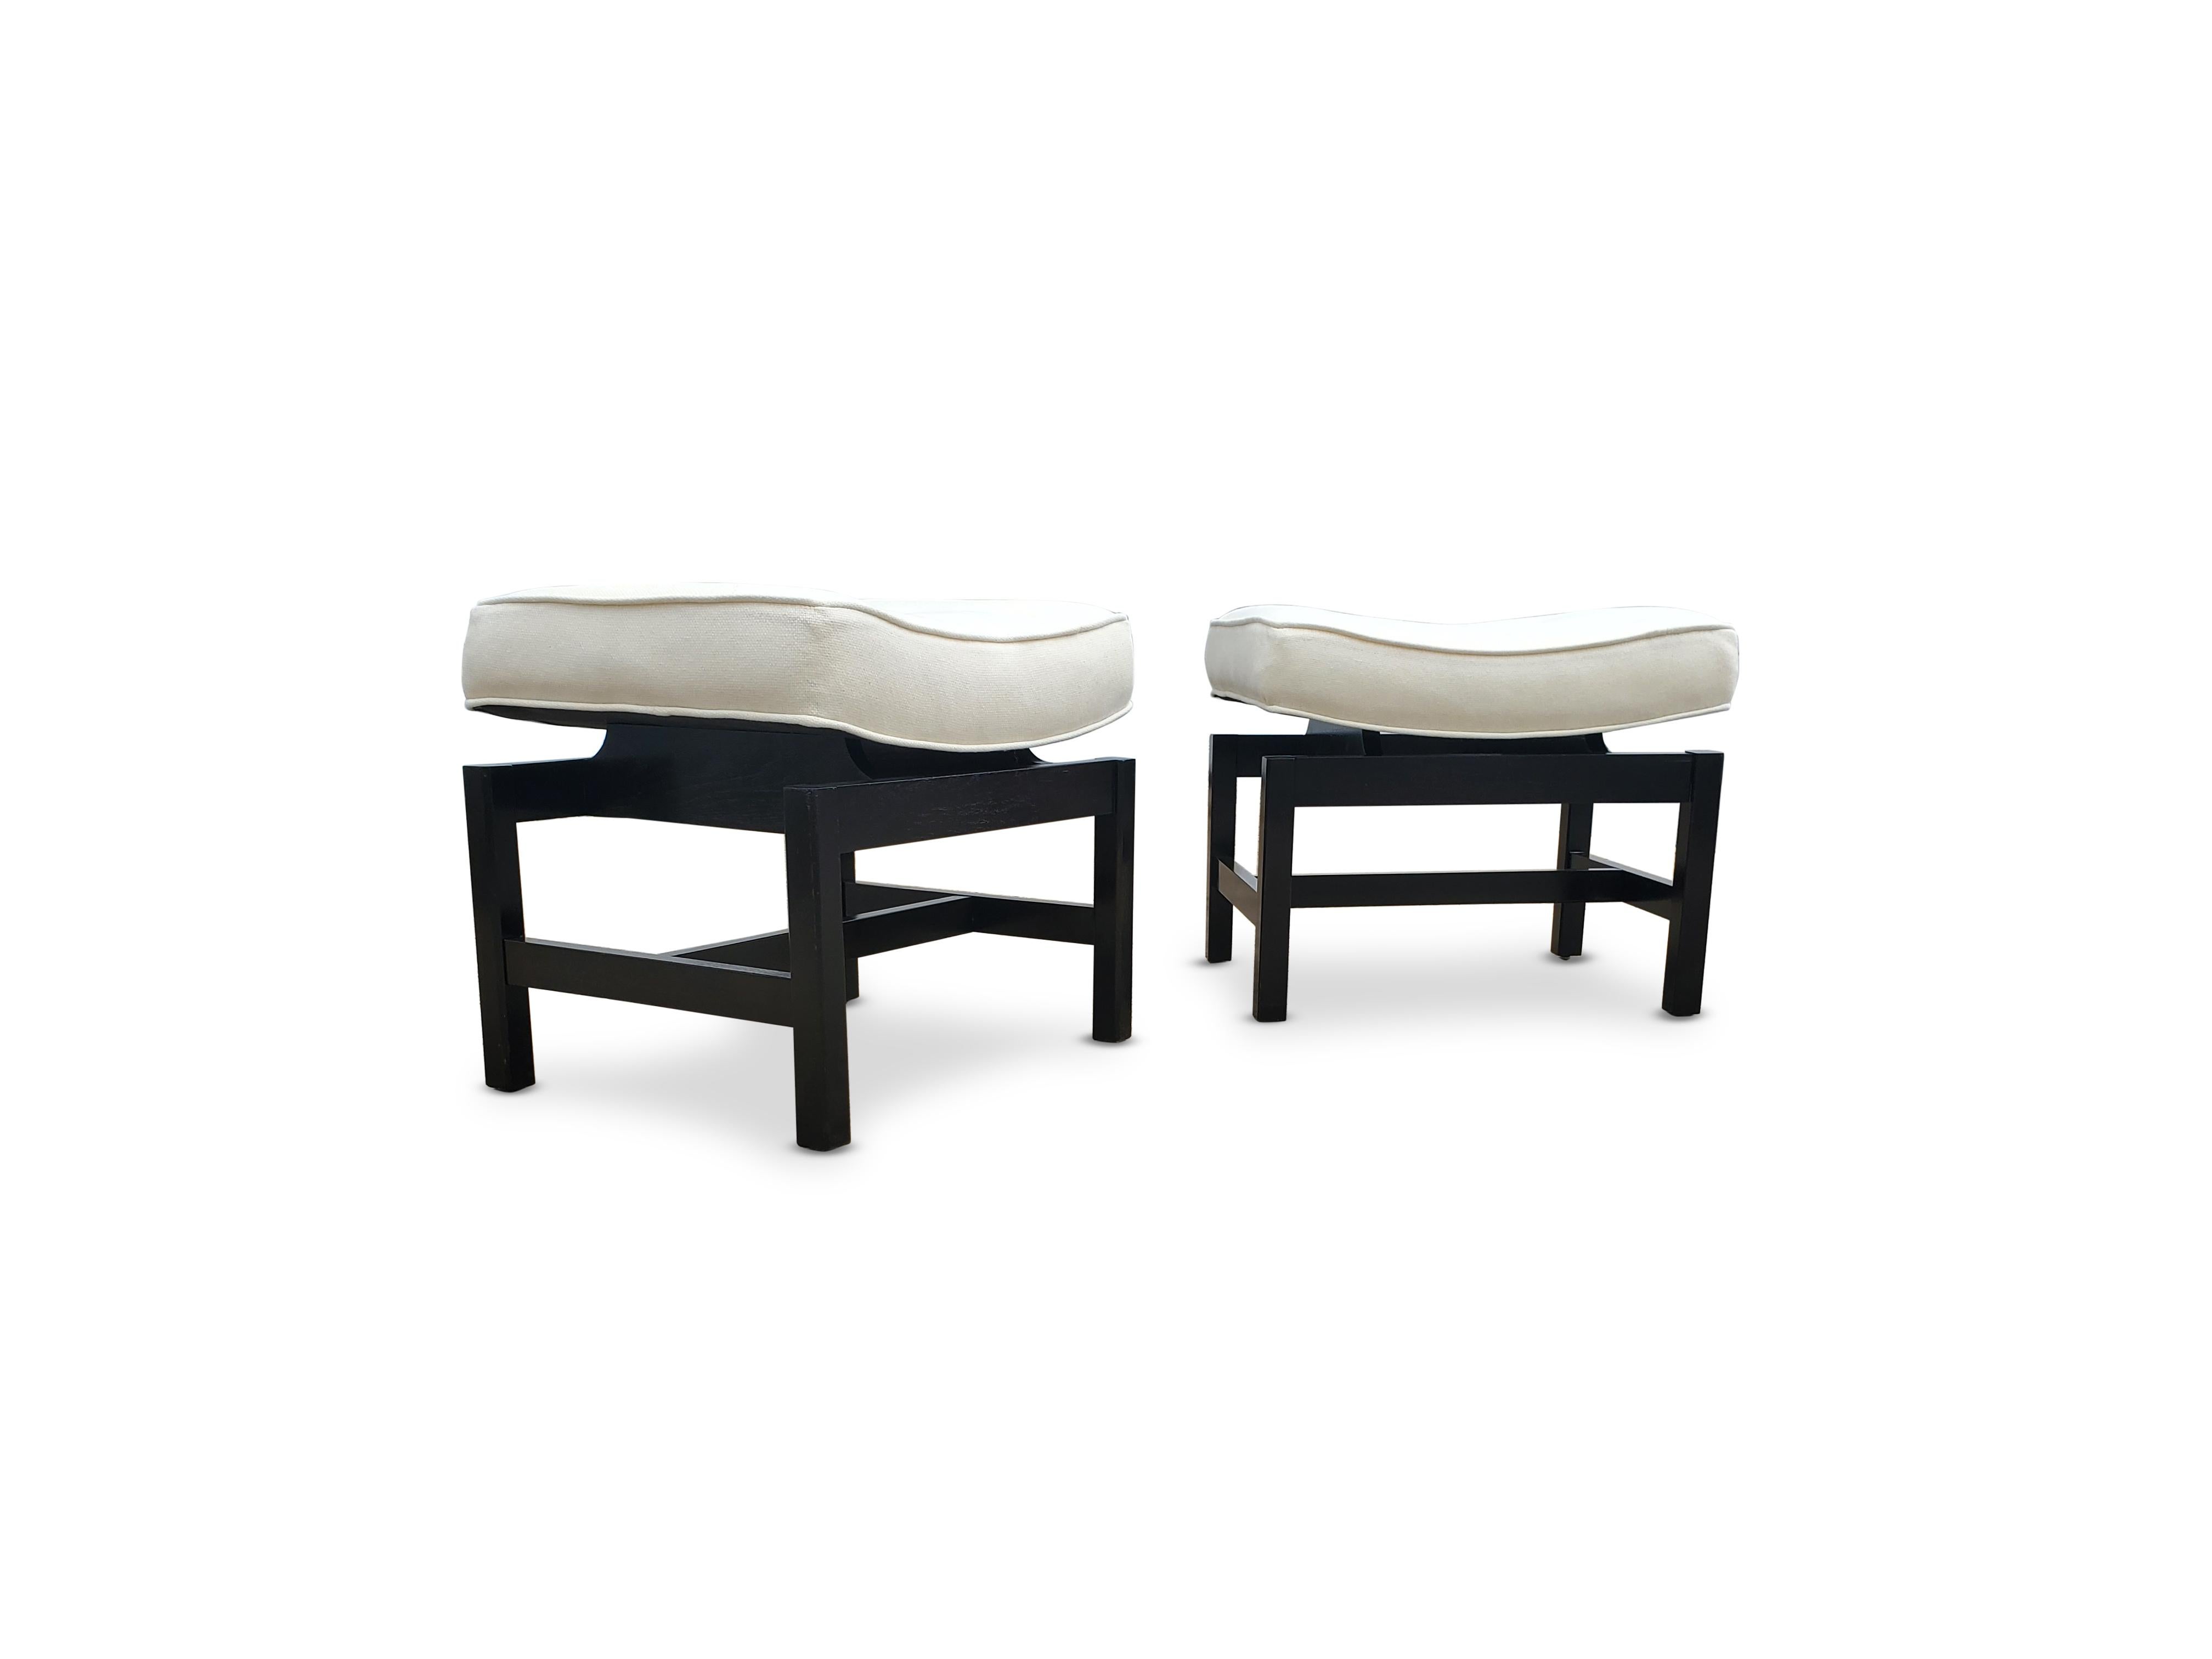 20th Century Pair of Footstools by Jens Risom